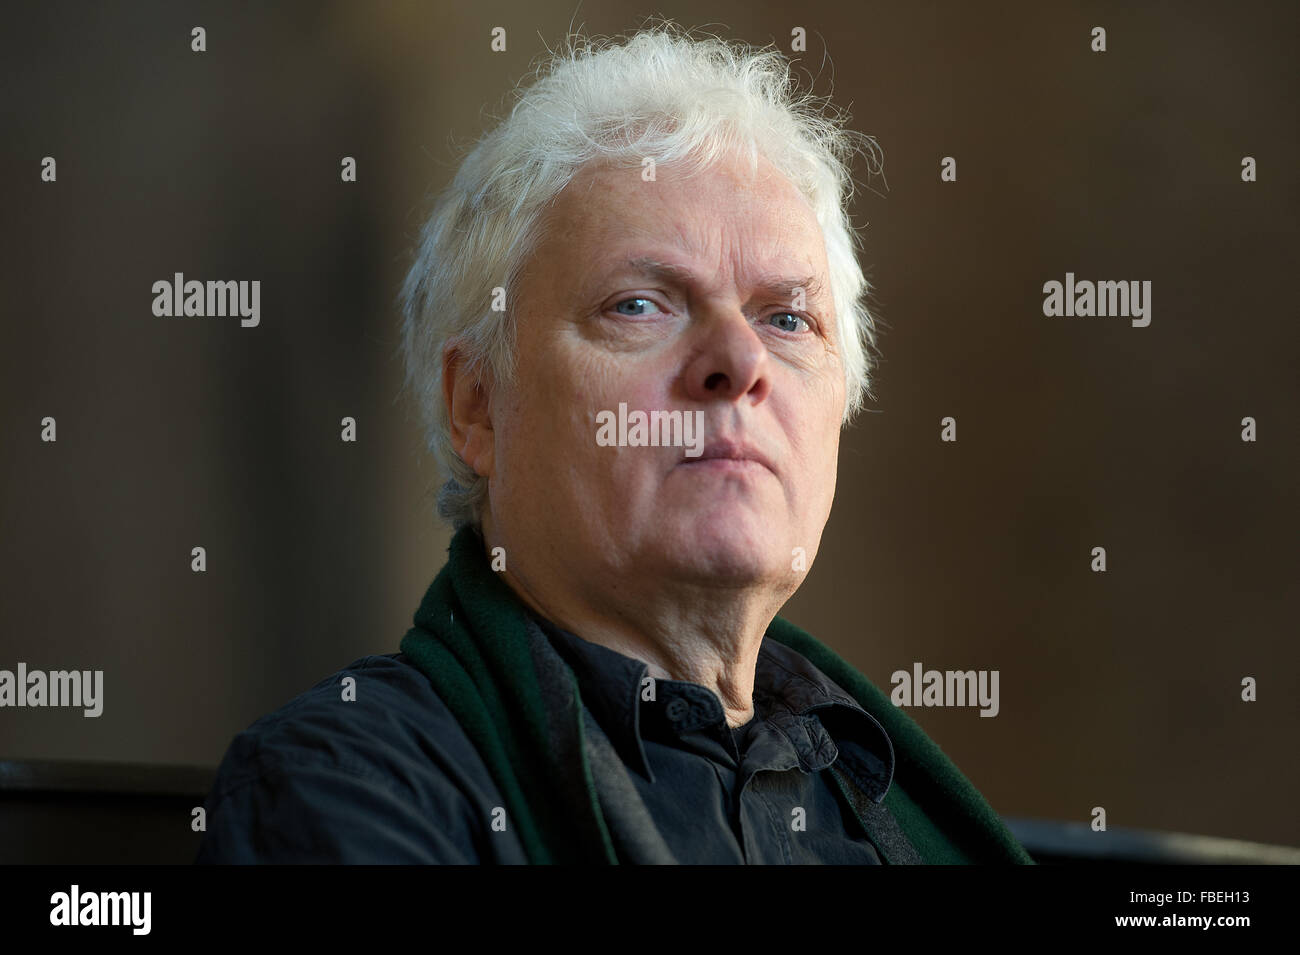 Composer and director Heiner Goebbels during the presentation of his multimedia installation 'Die Provinz des Menschen/The Human Province' in the Kunsthalle im Lipsiusbau in Dresden, Germany, 14 January 2016. The installation is made up of 54 different film sequences, played on a giant wall of monitors, together forming a composition that explores polyphony both as a musical and visual phenomenon and that presents an urban soundscape of various cities, criss-crossed by actor André Wilms. Visitors watch the same man observing the same rituals over the course of ten years, between 2004 and 201 Stock Photo